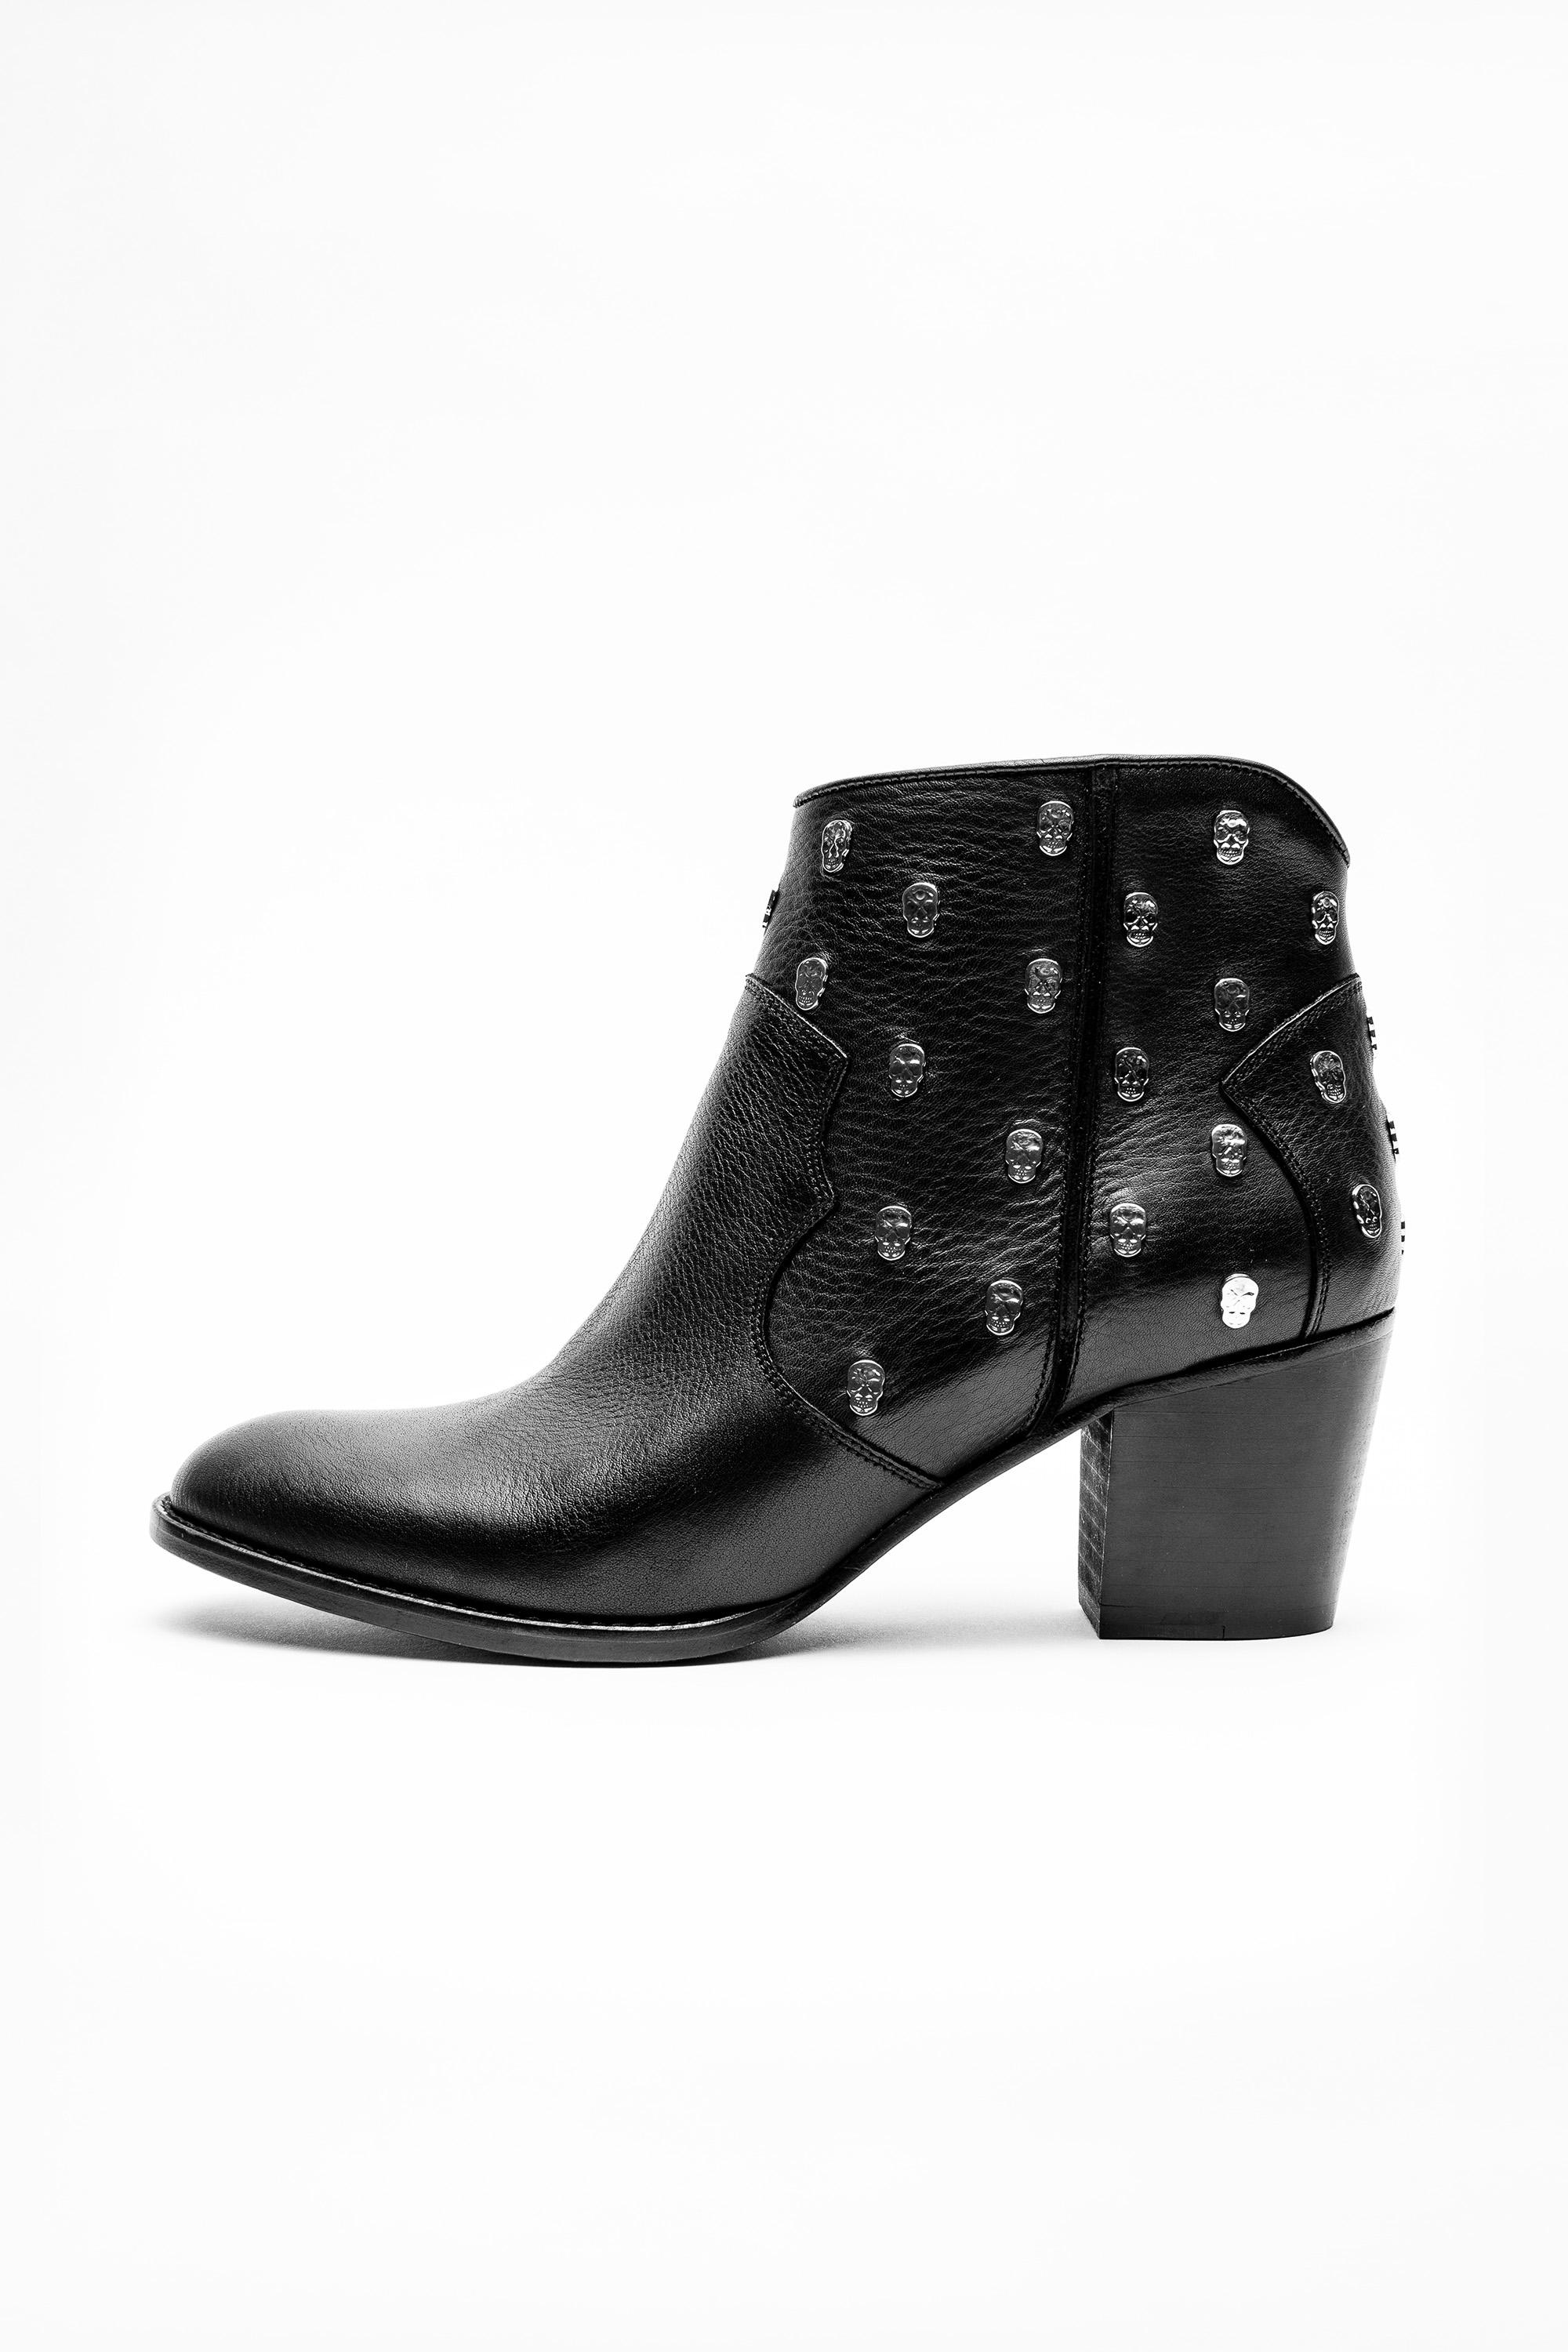 Zadig & Voltaire Leather Molly Skull Boots in Black -